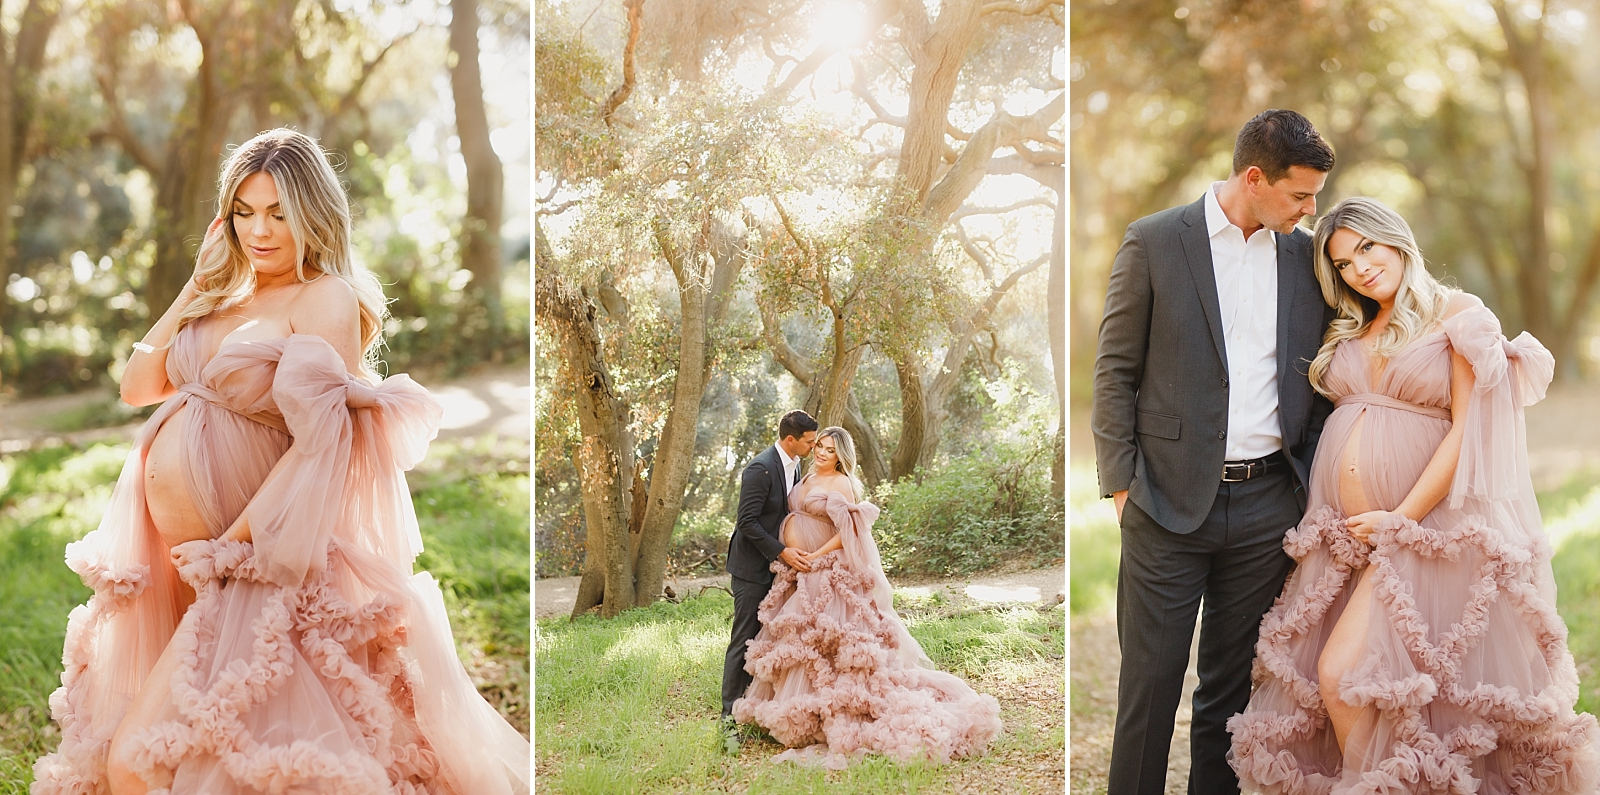 fairytale maternity session in couture gown